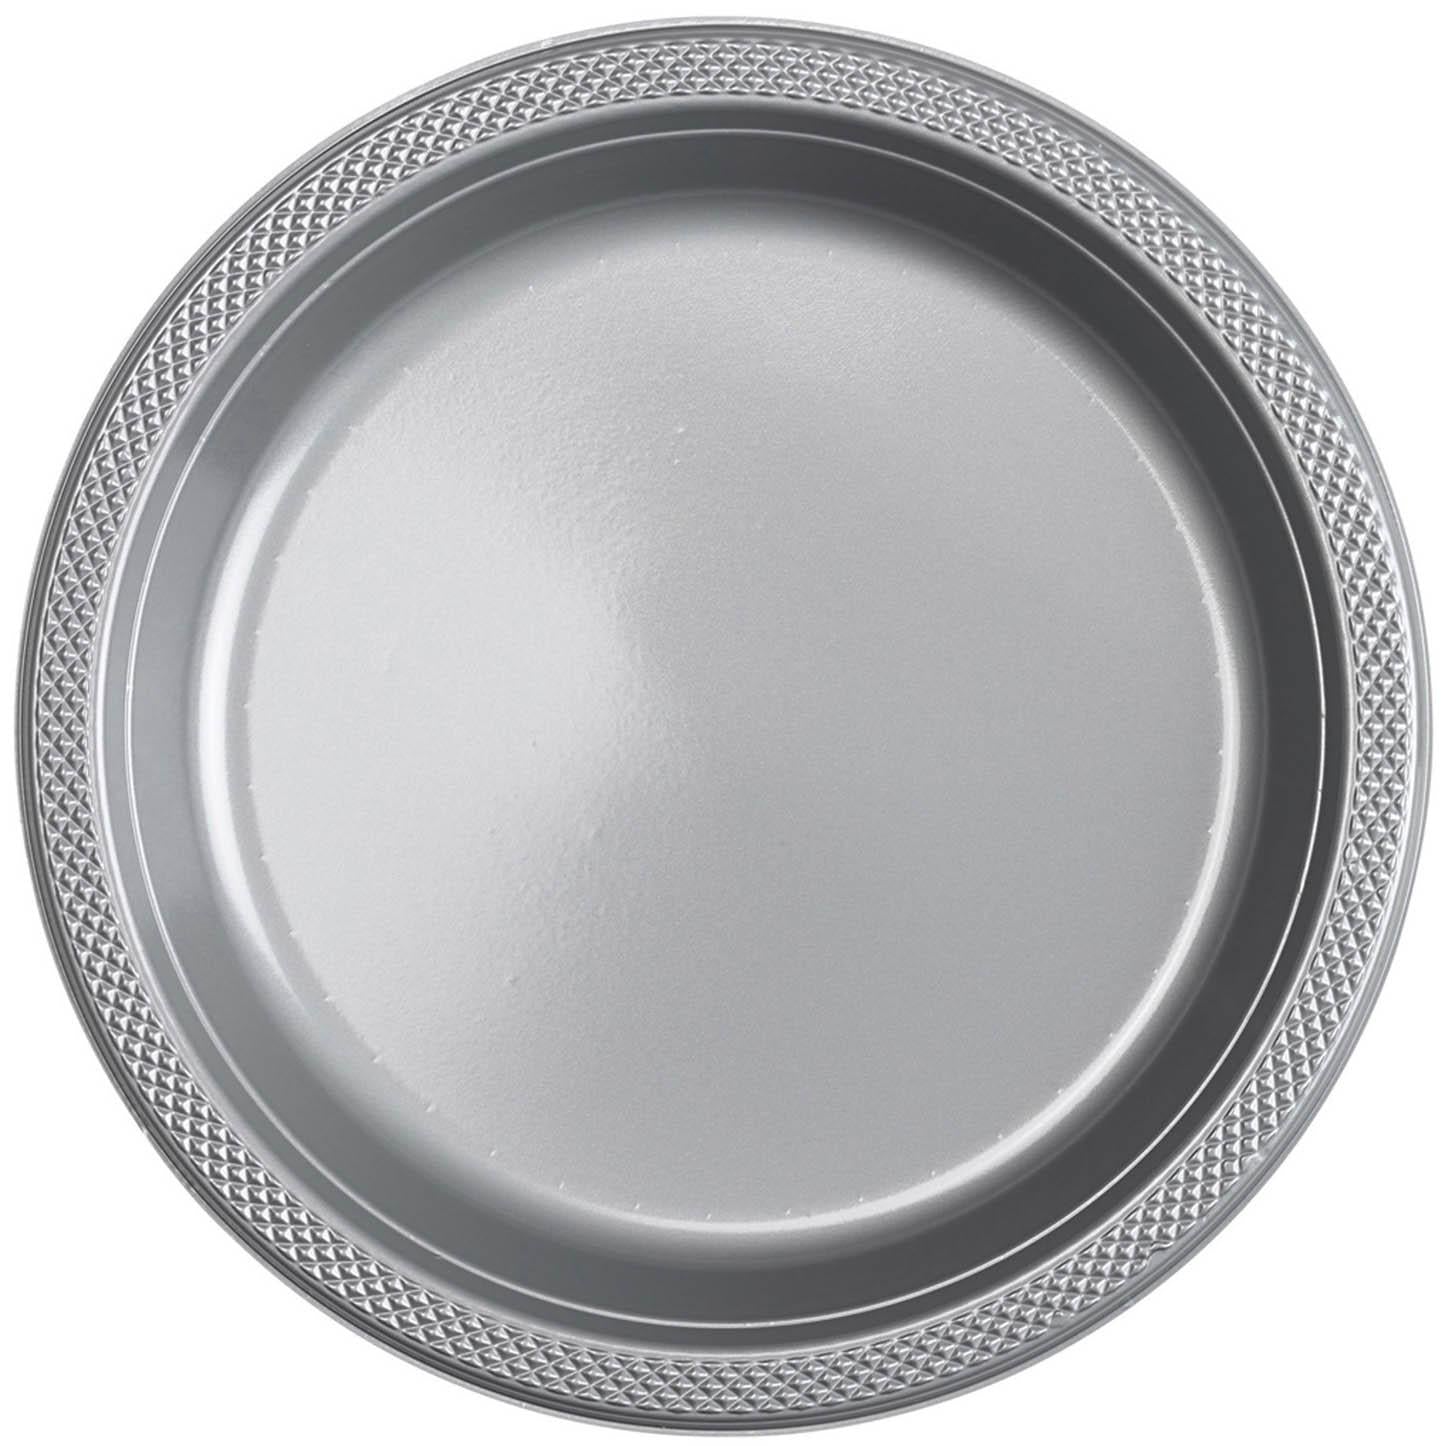 Silver Sparkle Plastic Plates 10.25in, 20pcs Solid Tableware - Party Centre